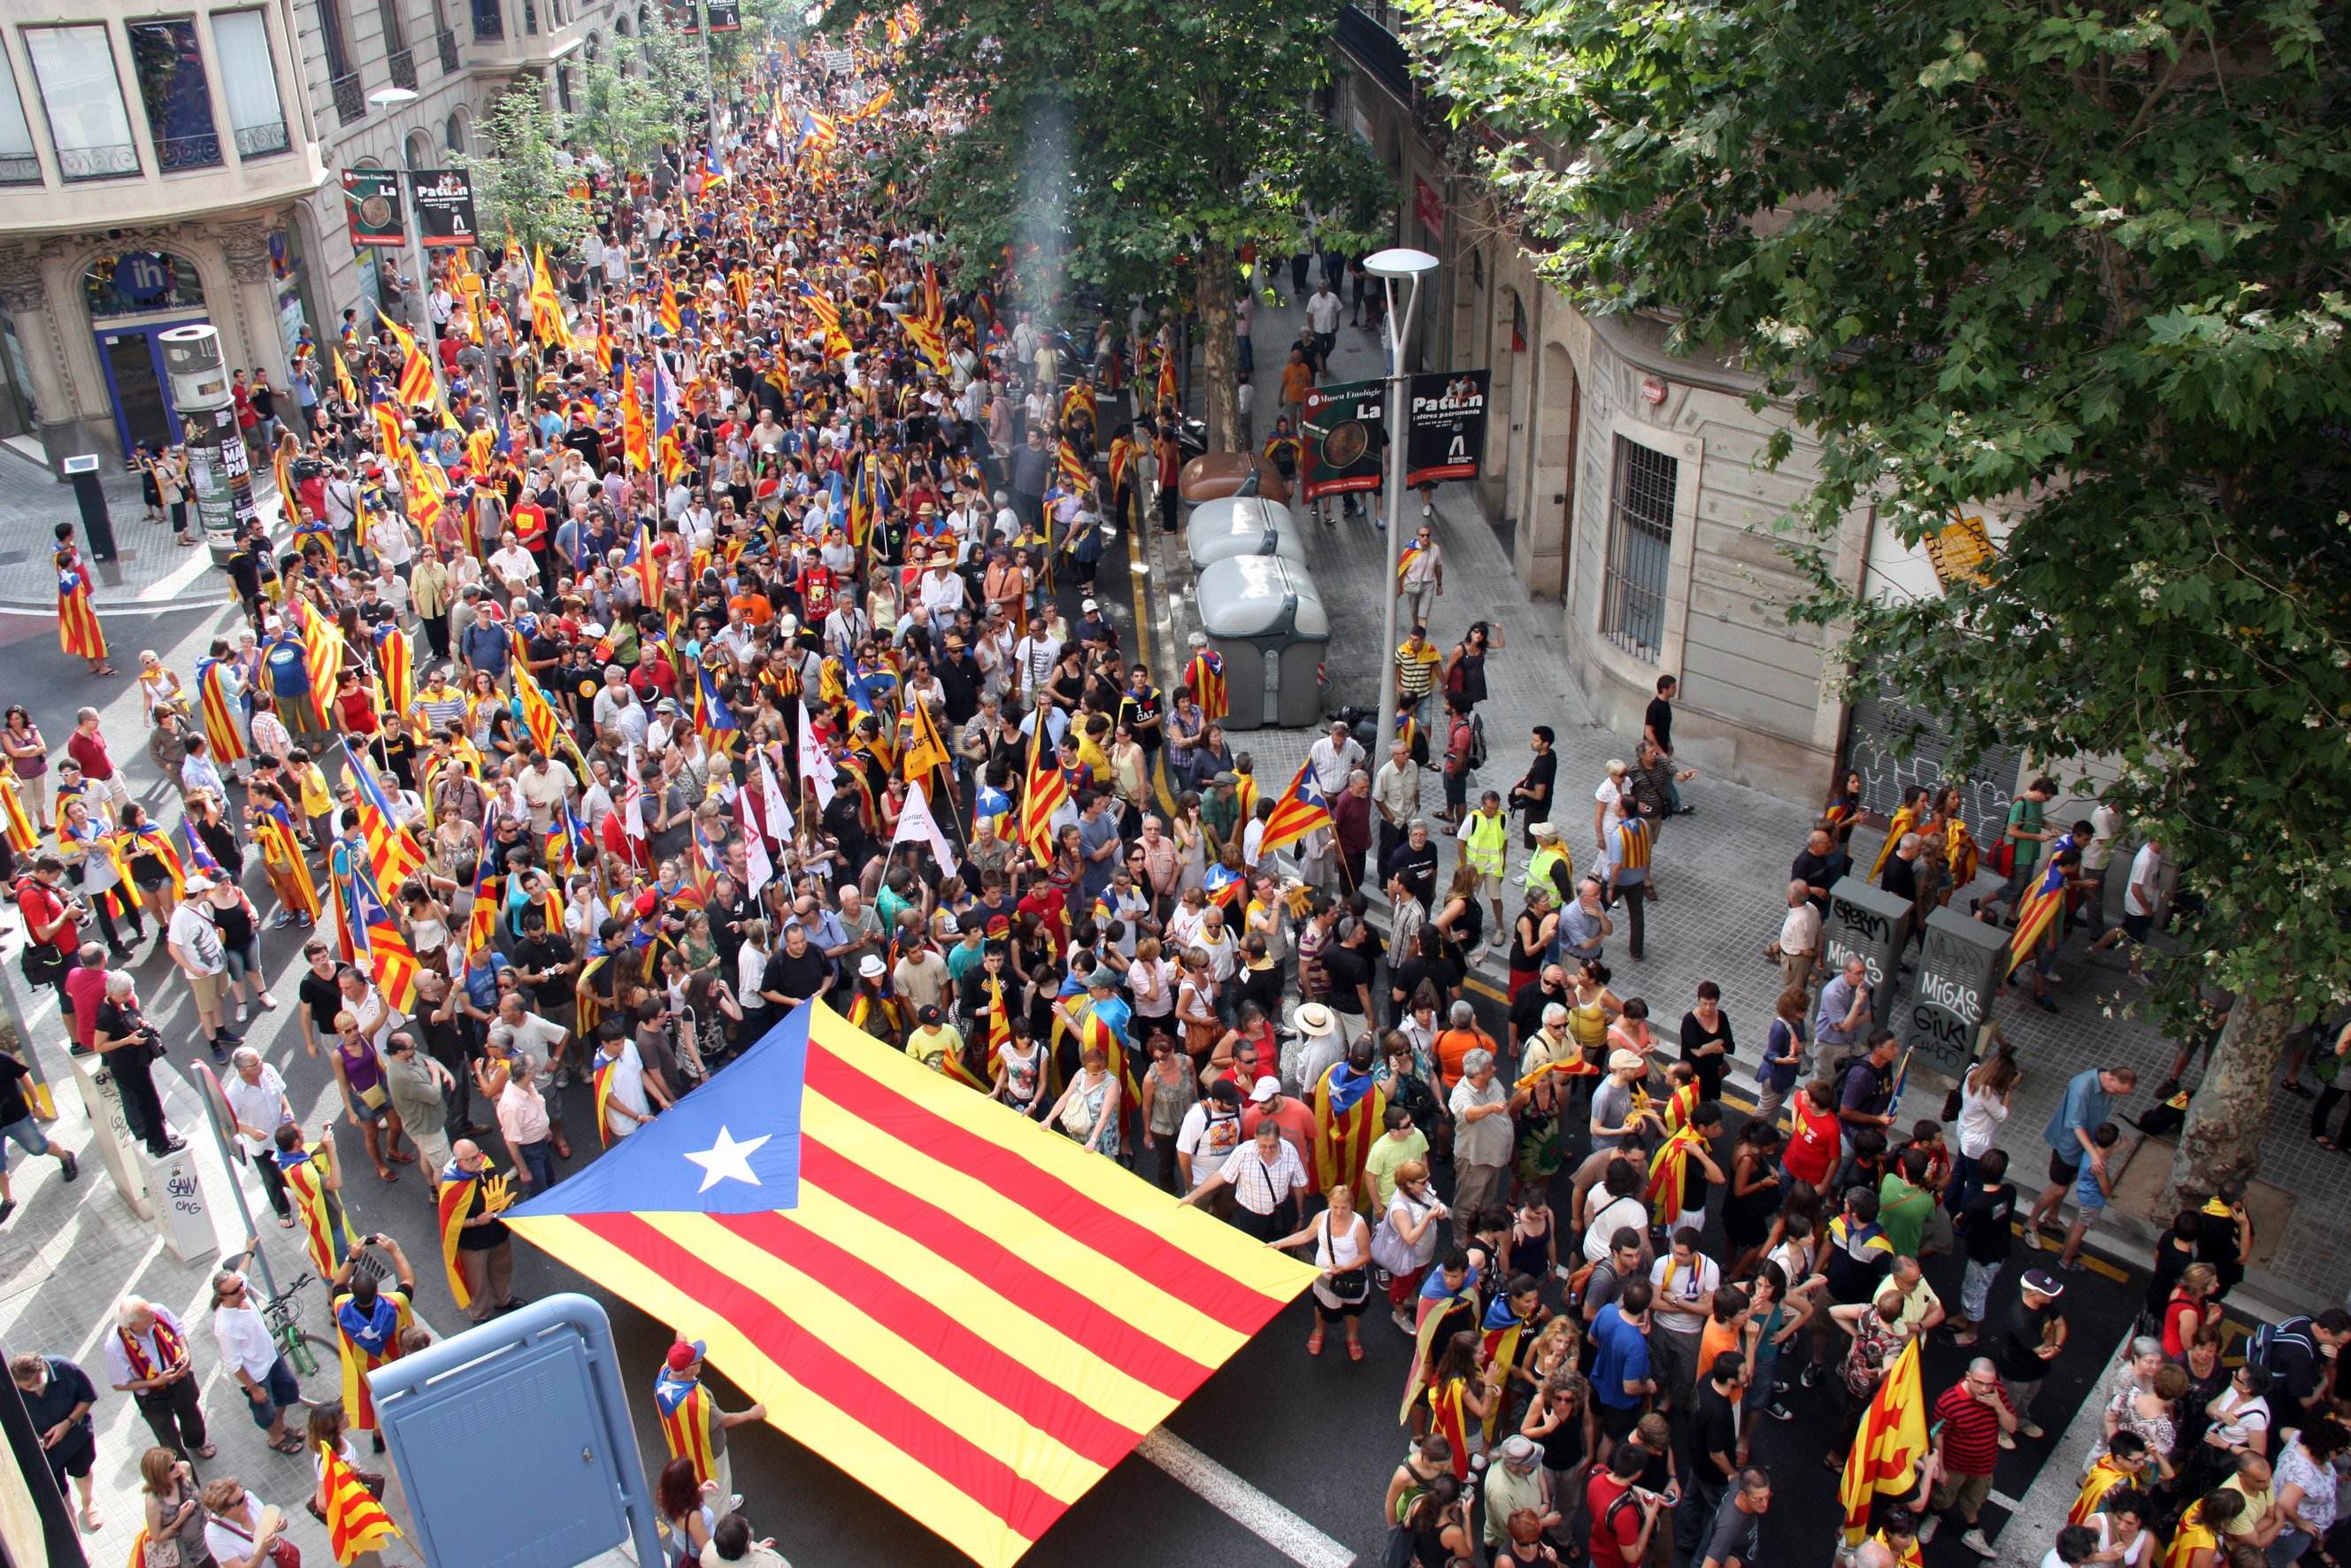 CEO corrects poll errors: 40.8% of Catalans want independence, with 52.3% opposed